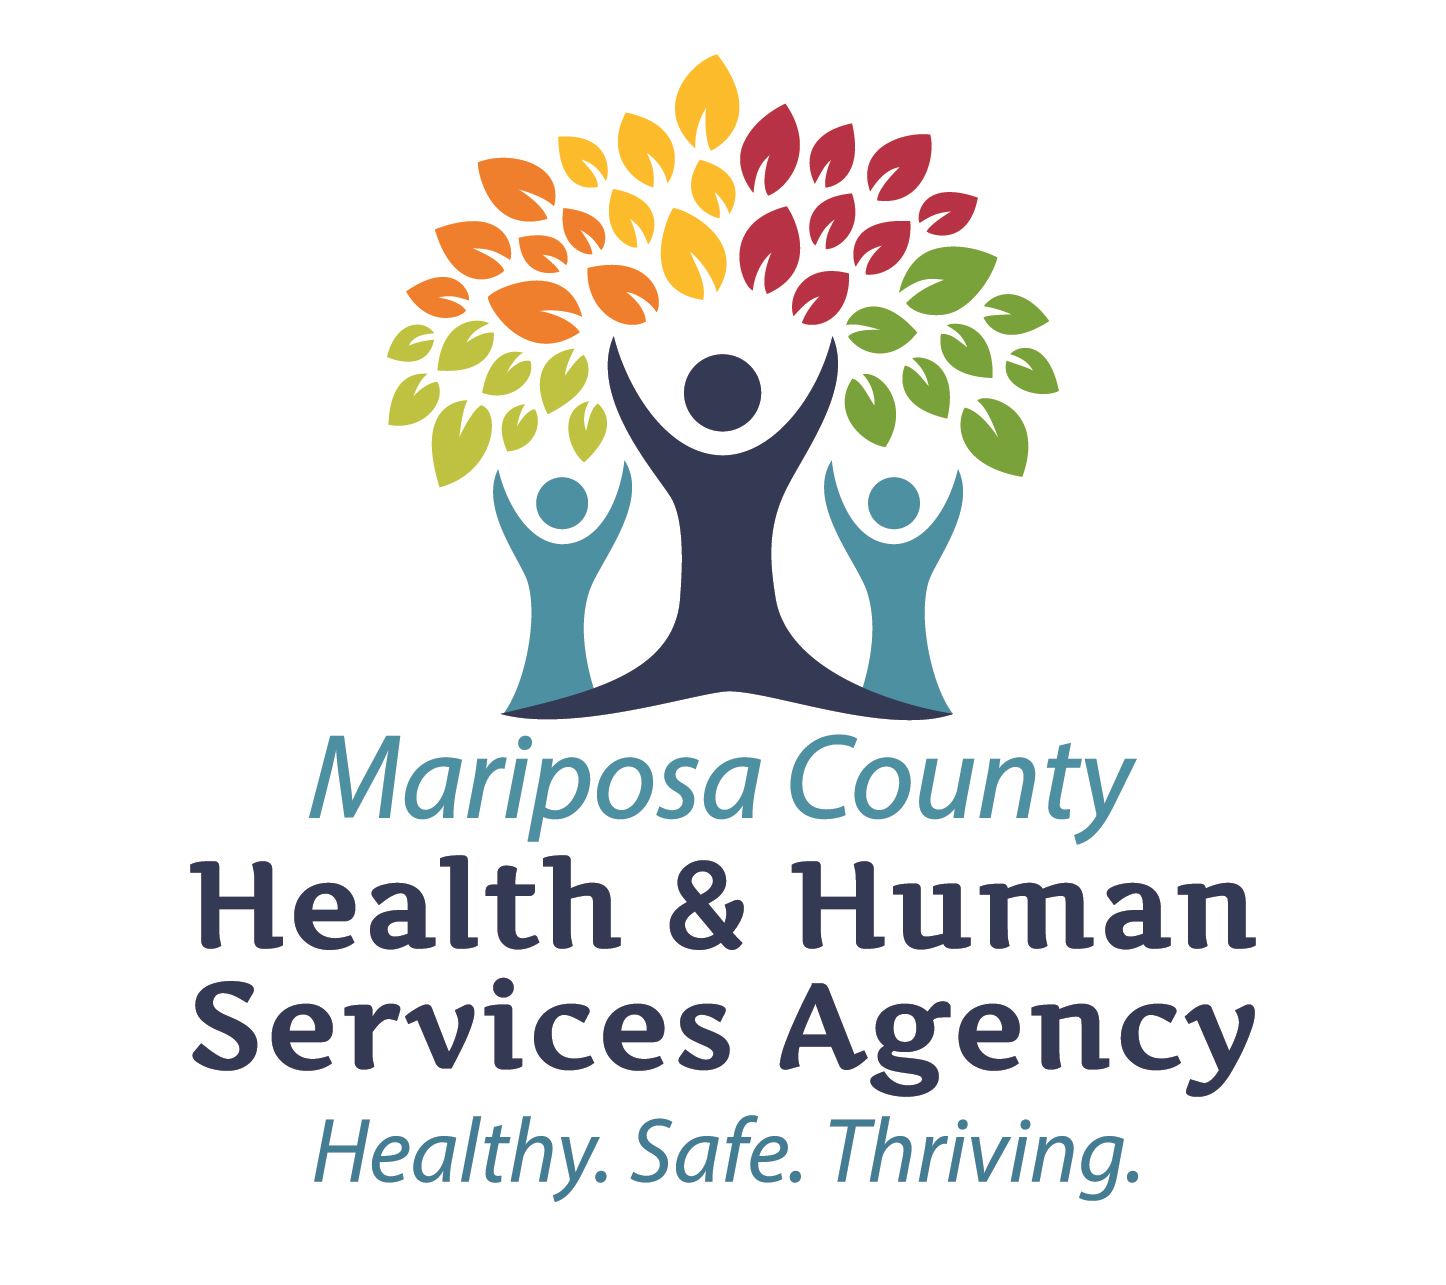 Mariposa County Health and Human Services Agency